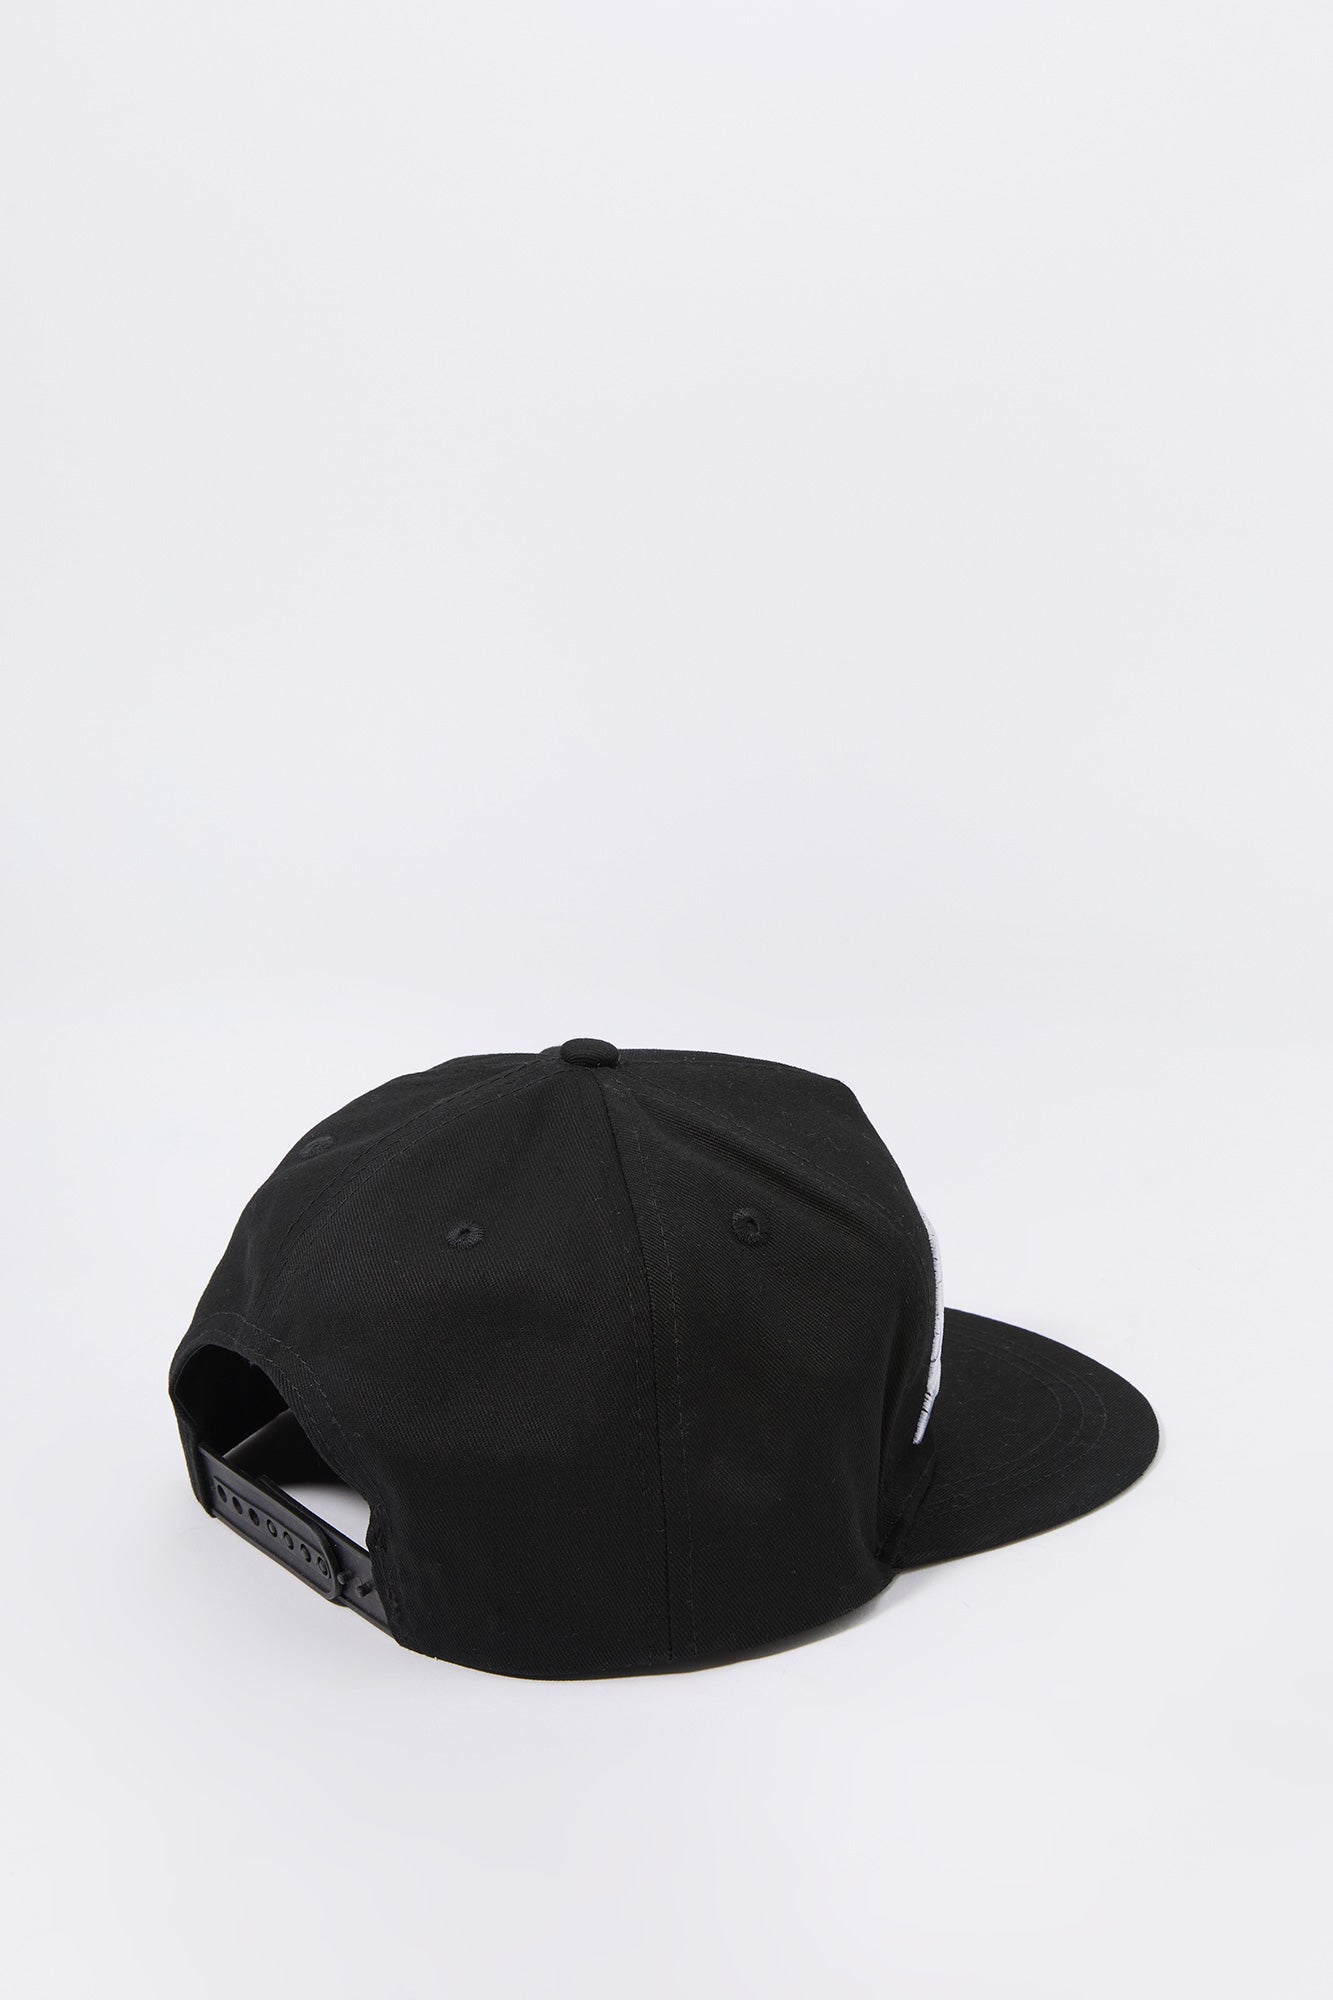 East Embroidered Snapback Hat